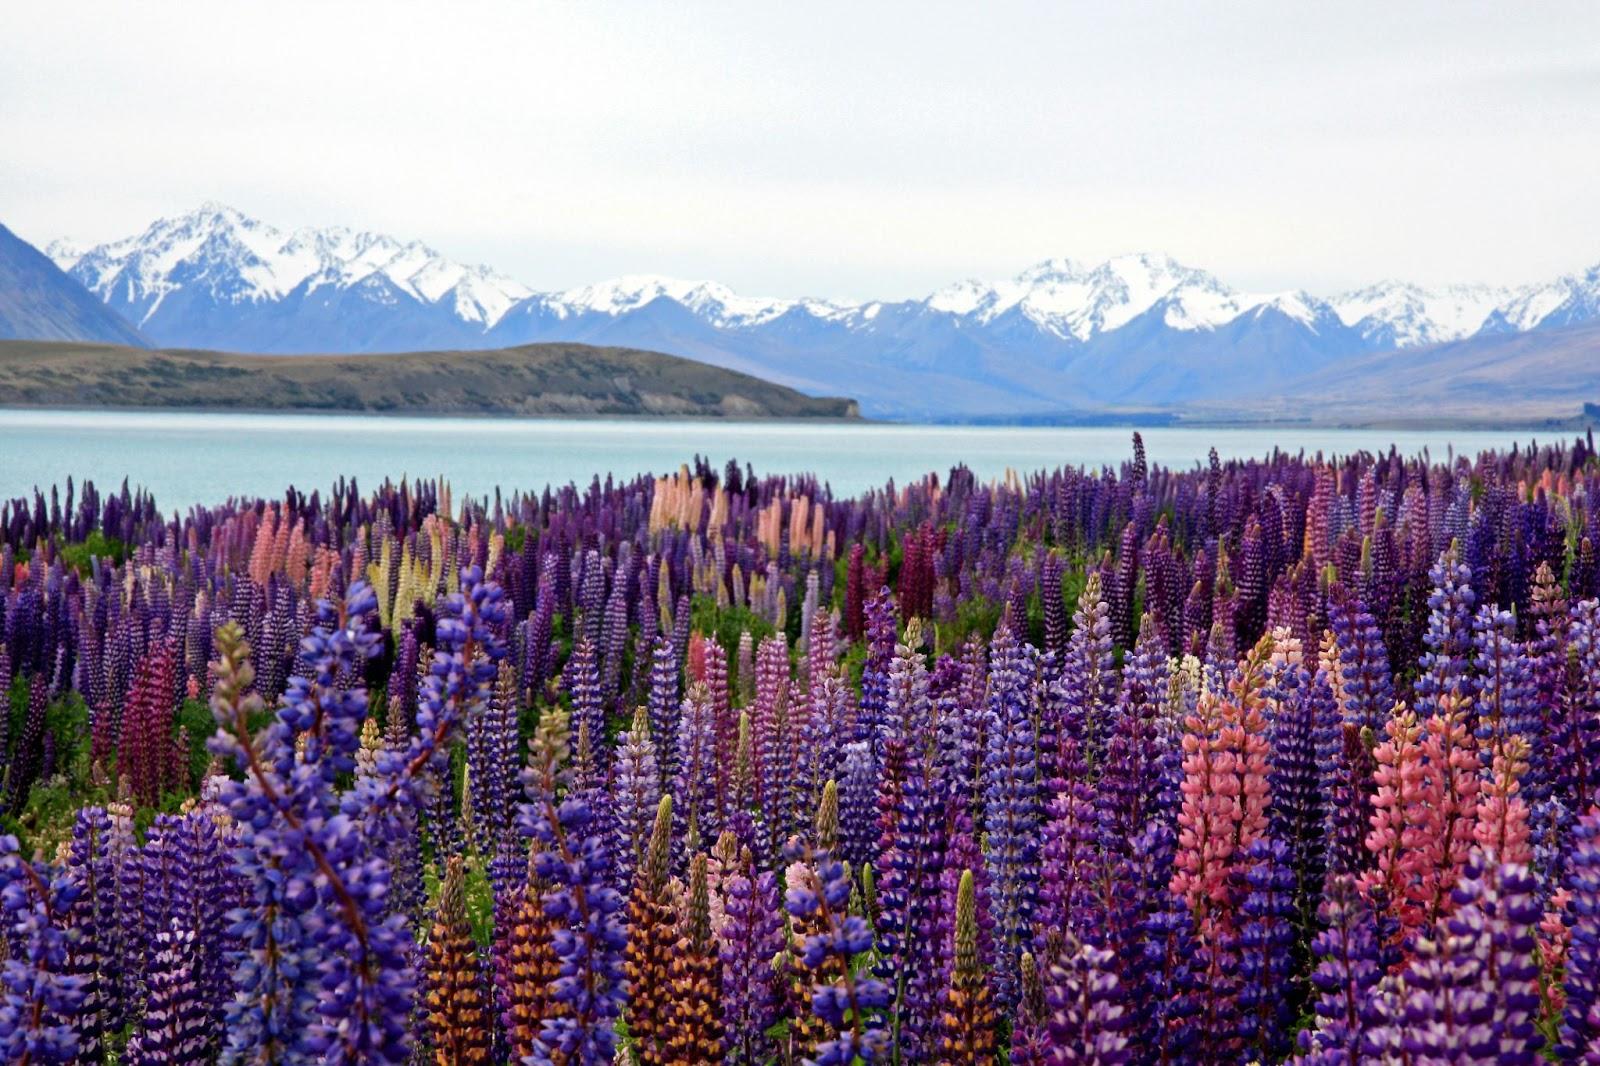 Colourful lupins put on a brilliant display on the shore of Lake Tekapo. New Zealand